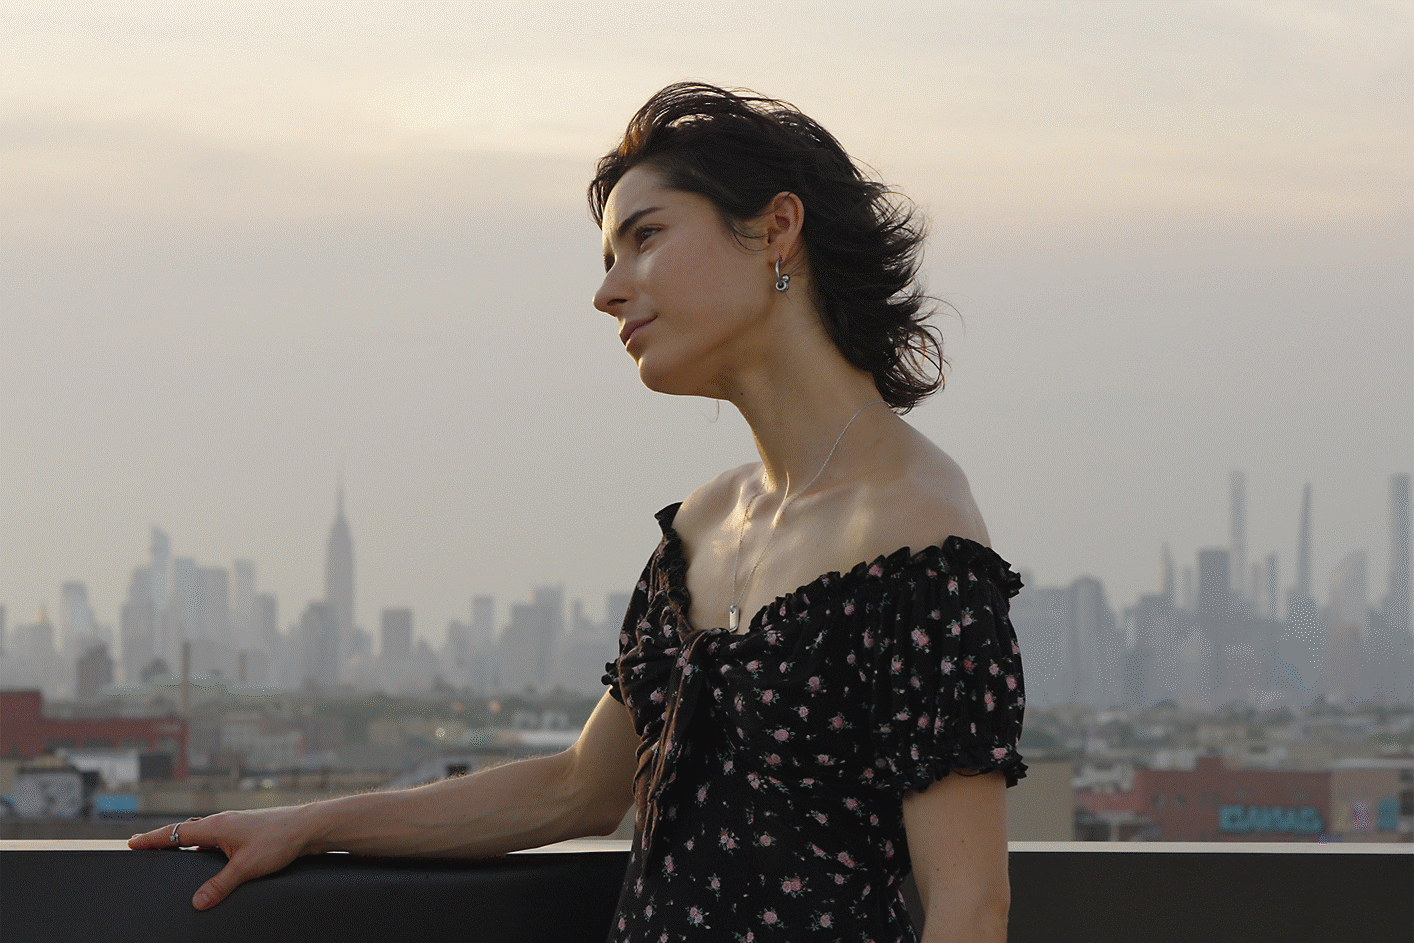  Image of a woman with a city background